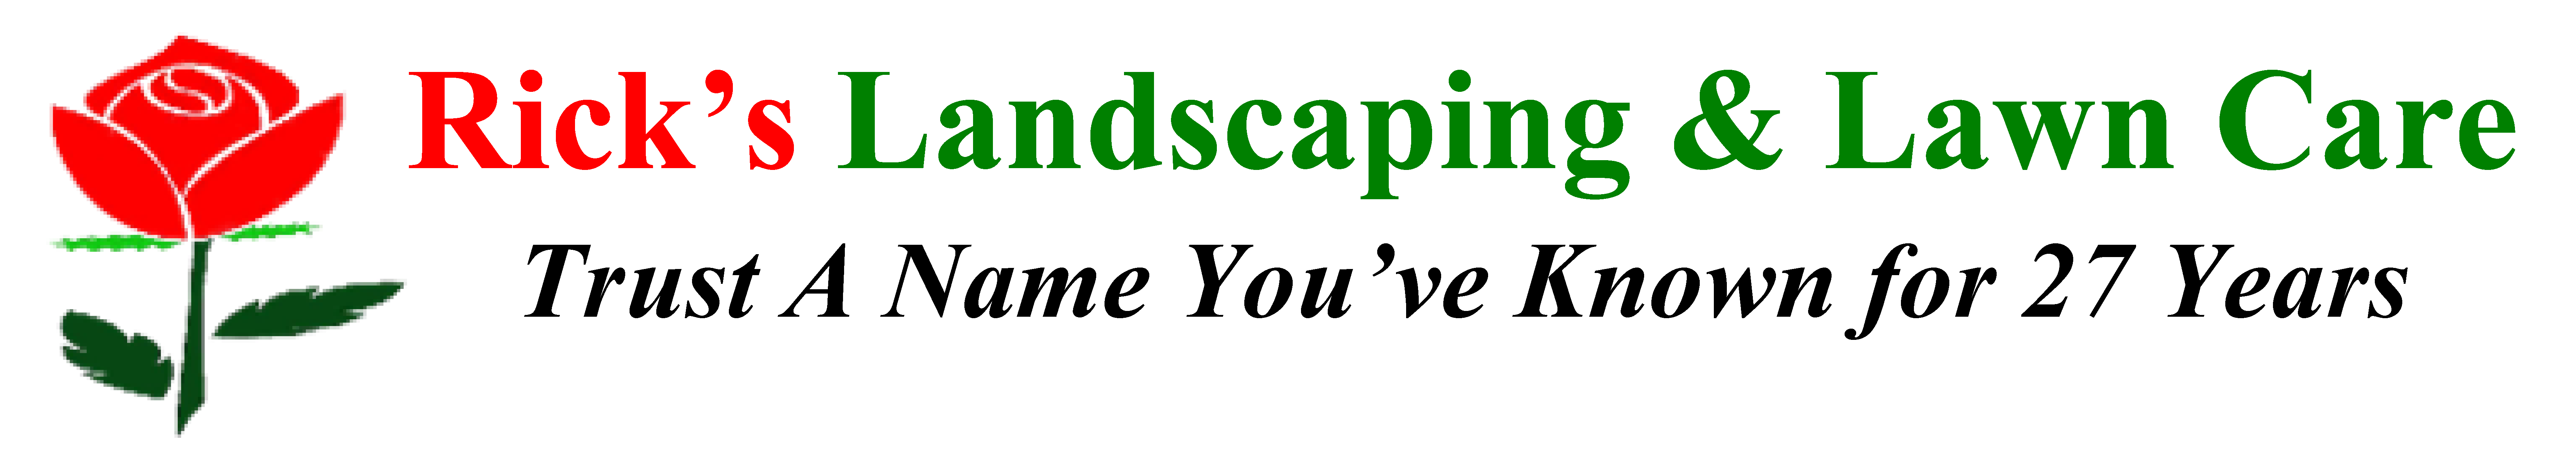 Rick's Landscaping & Lawn Care